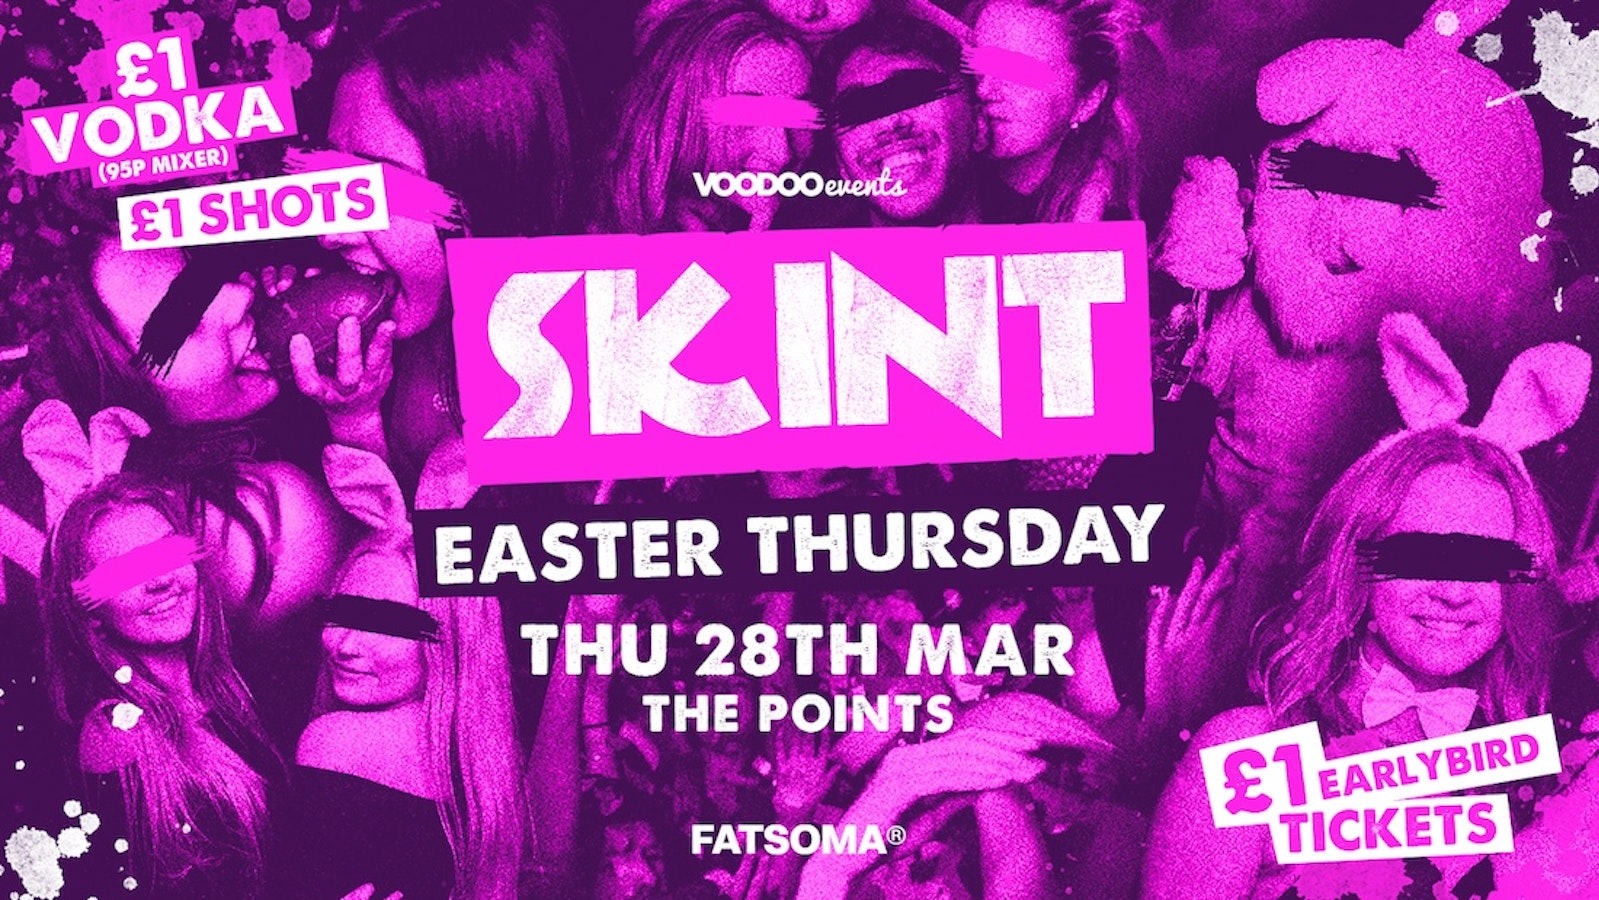 Skint – Easter Special!